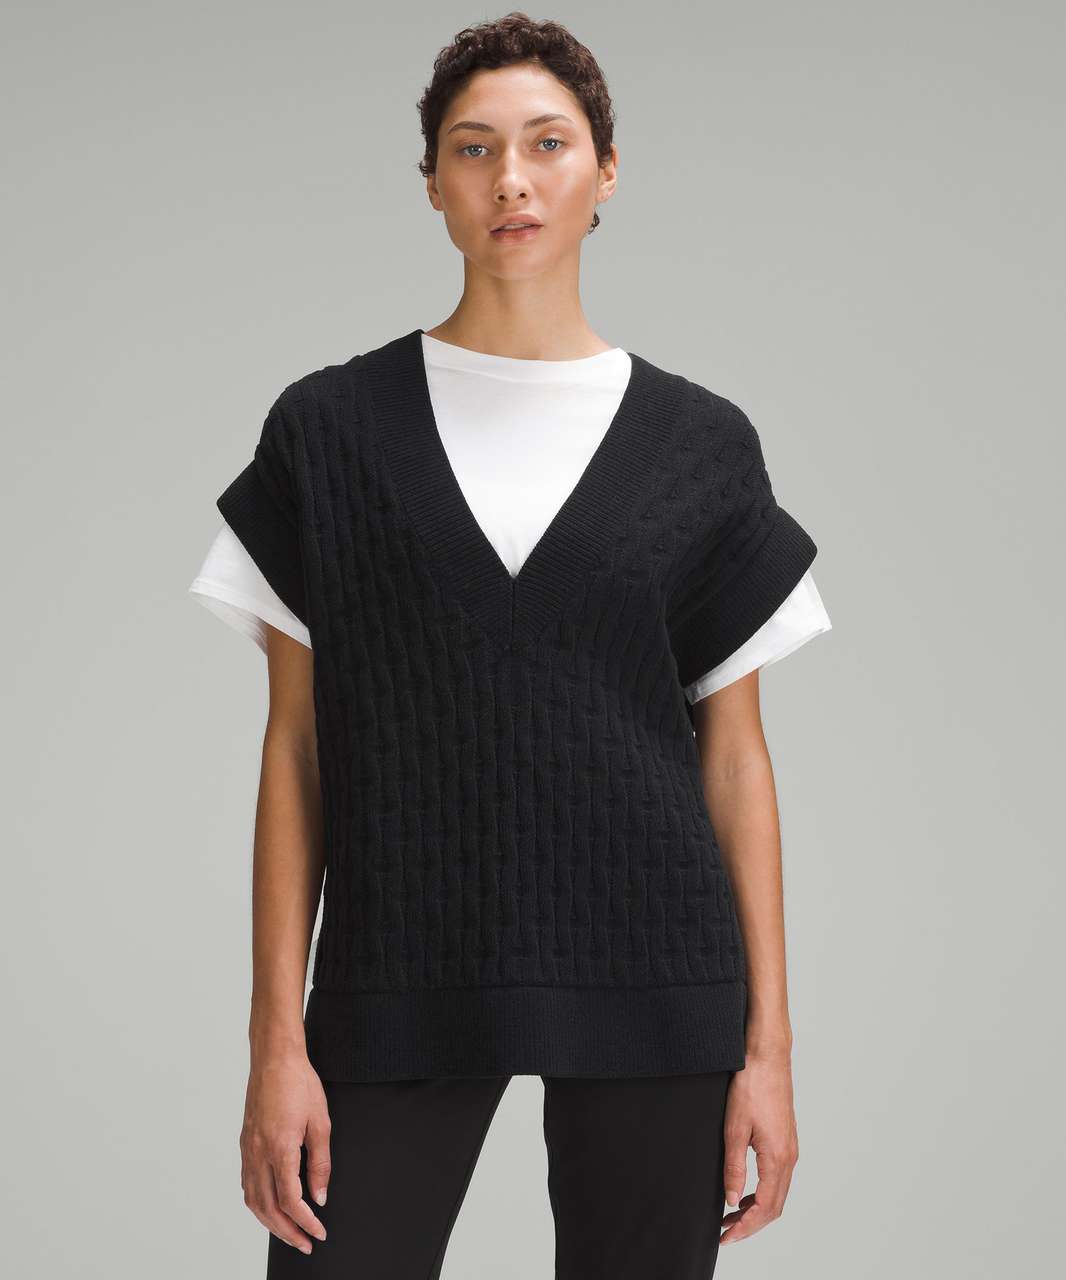 Lululemon Cable-Knit Relaxed-Fit Sweater Vest - Black